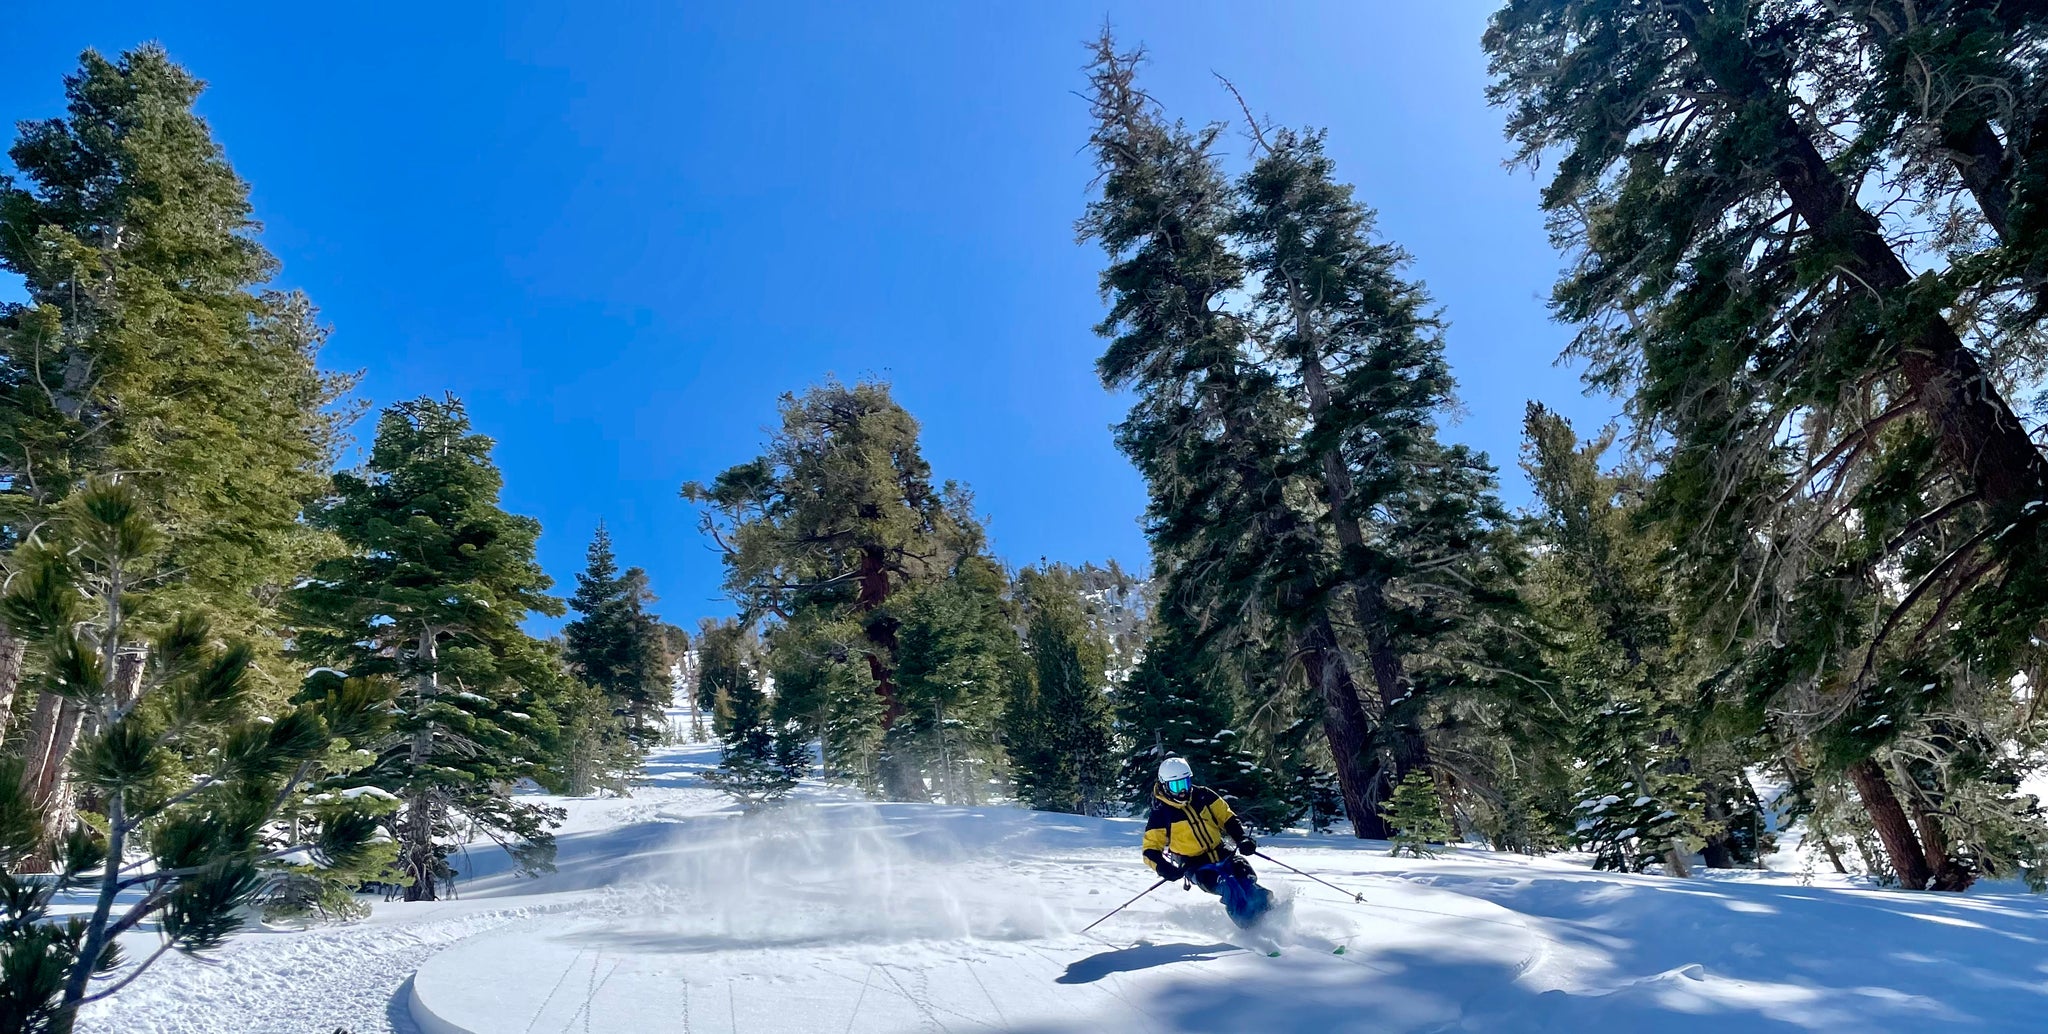 backcountry skiing the eastern sierra and mammoth area